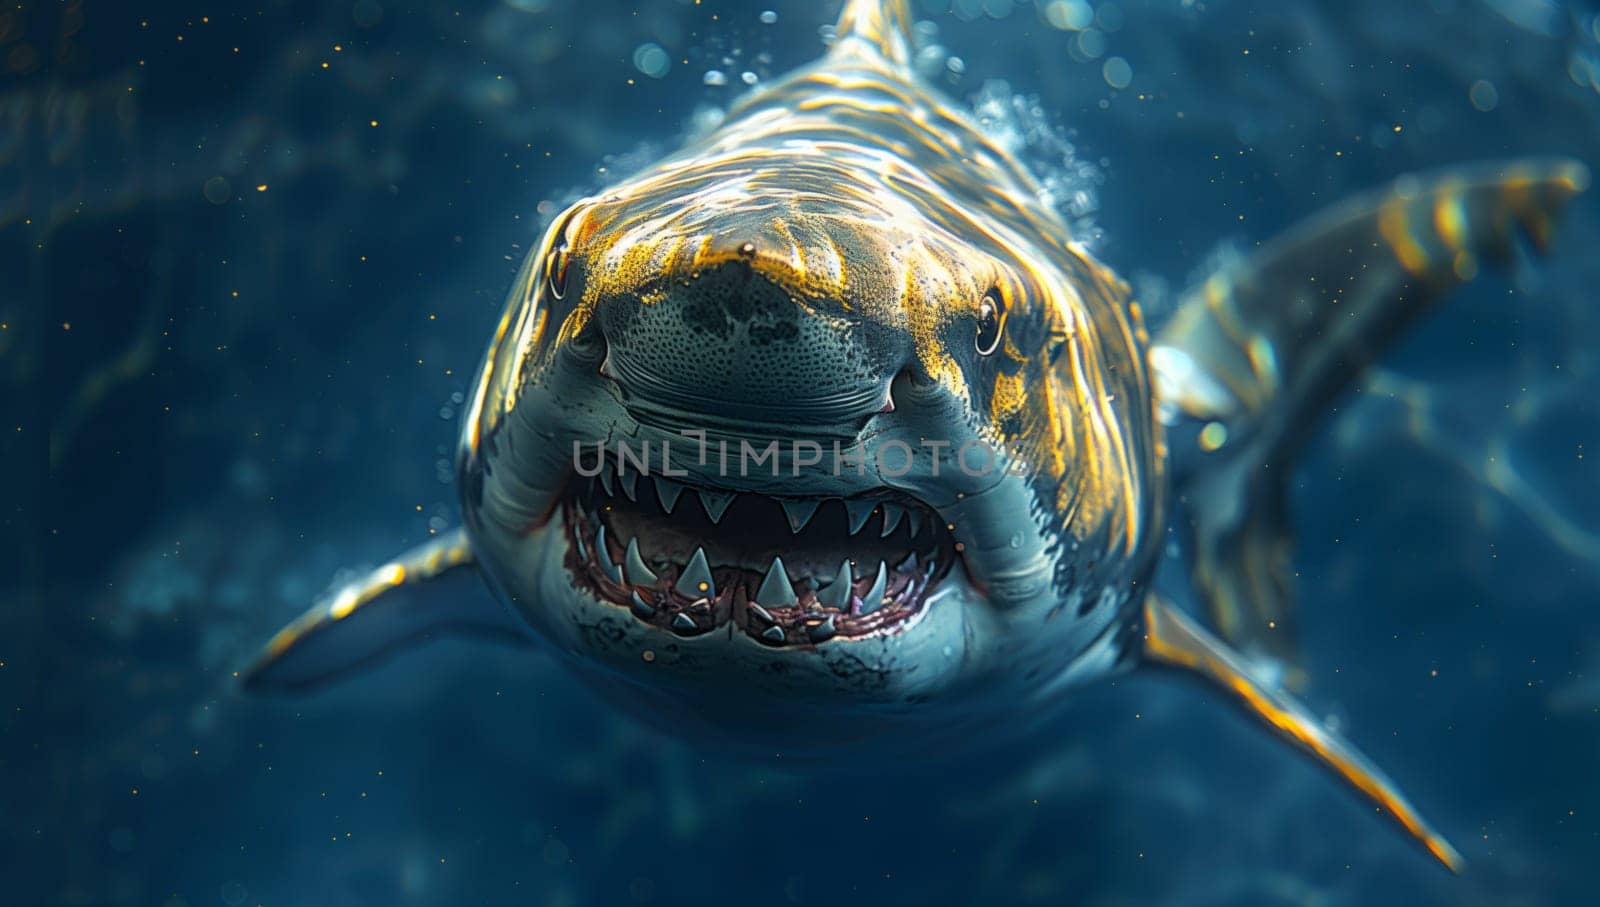 A great white shark, a marine organism, swims underwater with its jaw wide open in the liquid environment of the ocean, showcasing its powerful fins as it searches for fish or marine mammals